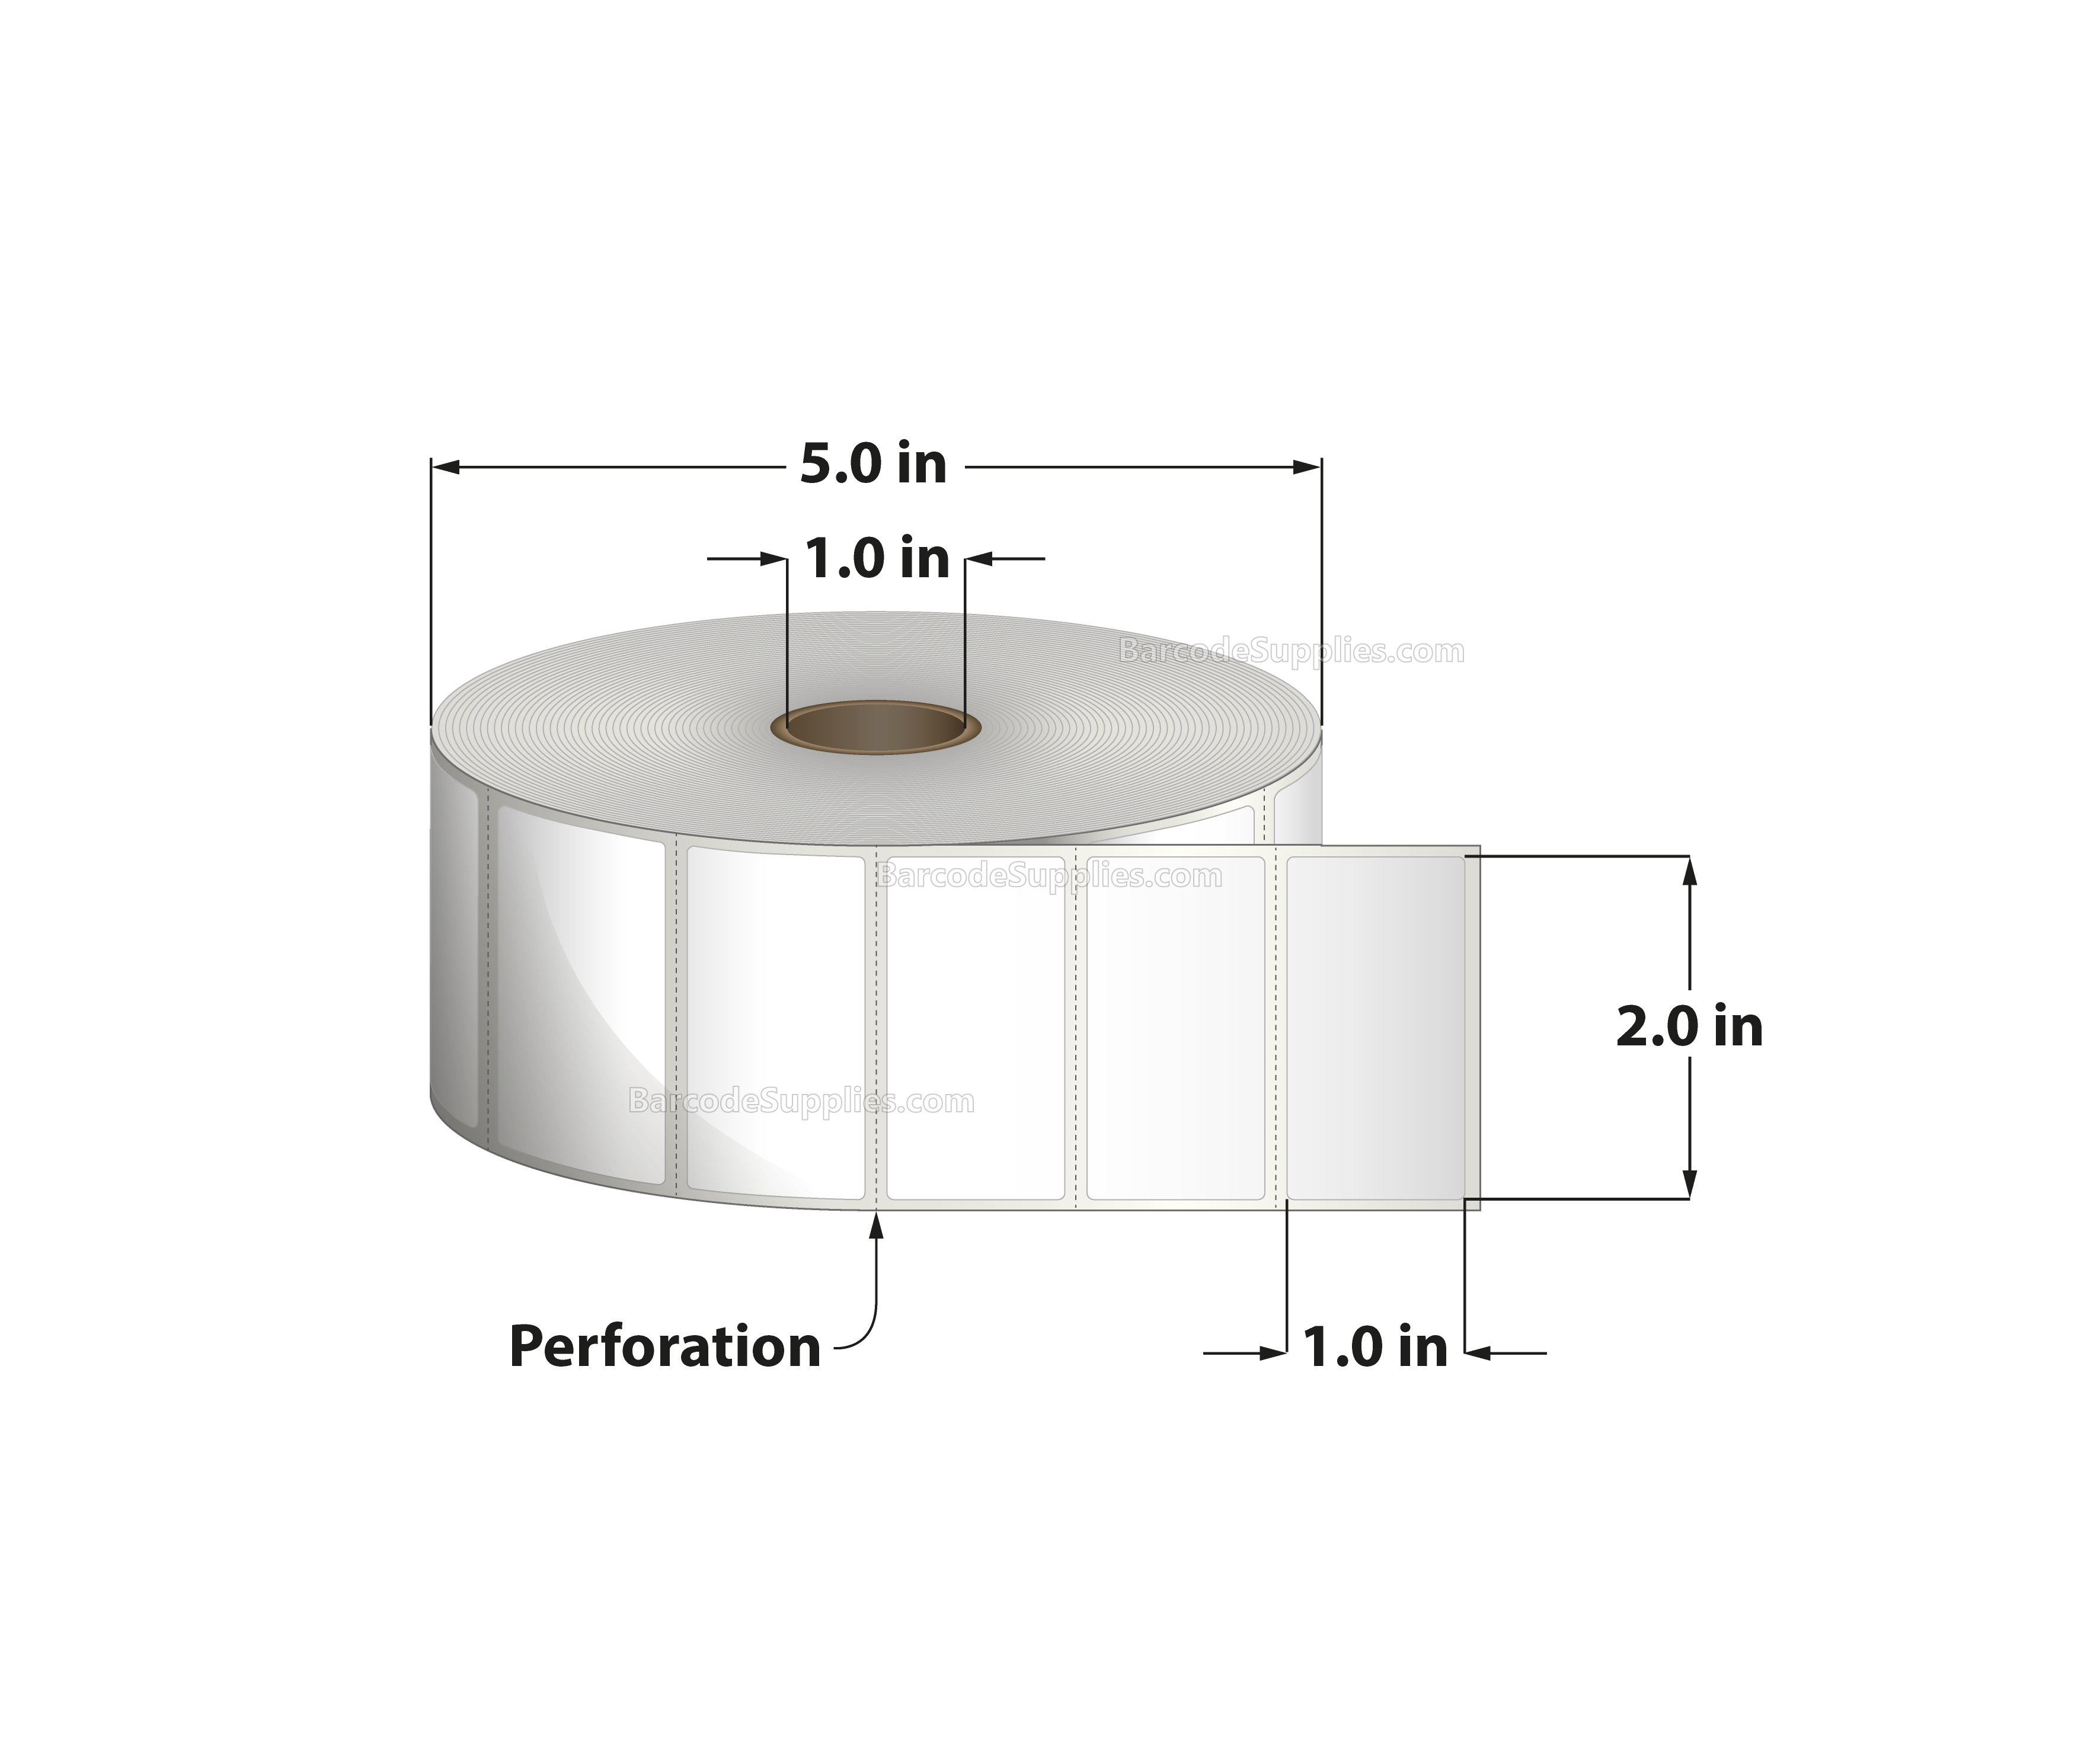 2 x 1 Thermal Transfer White Labels With Permanent Adhesive - Perforated - 2500 Labels Per Roll - Carton Of 12 Rolls - 30000 Labels Total - MPN: RT-2-1-2500-1 - BarcodeSource, Inc.